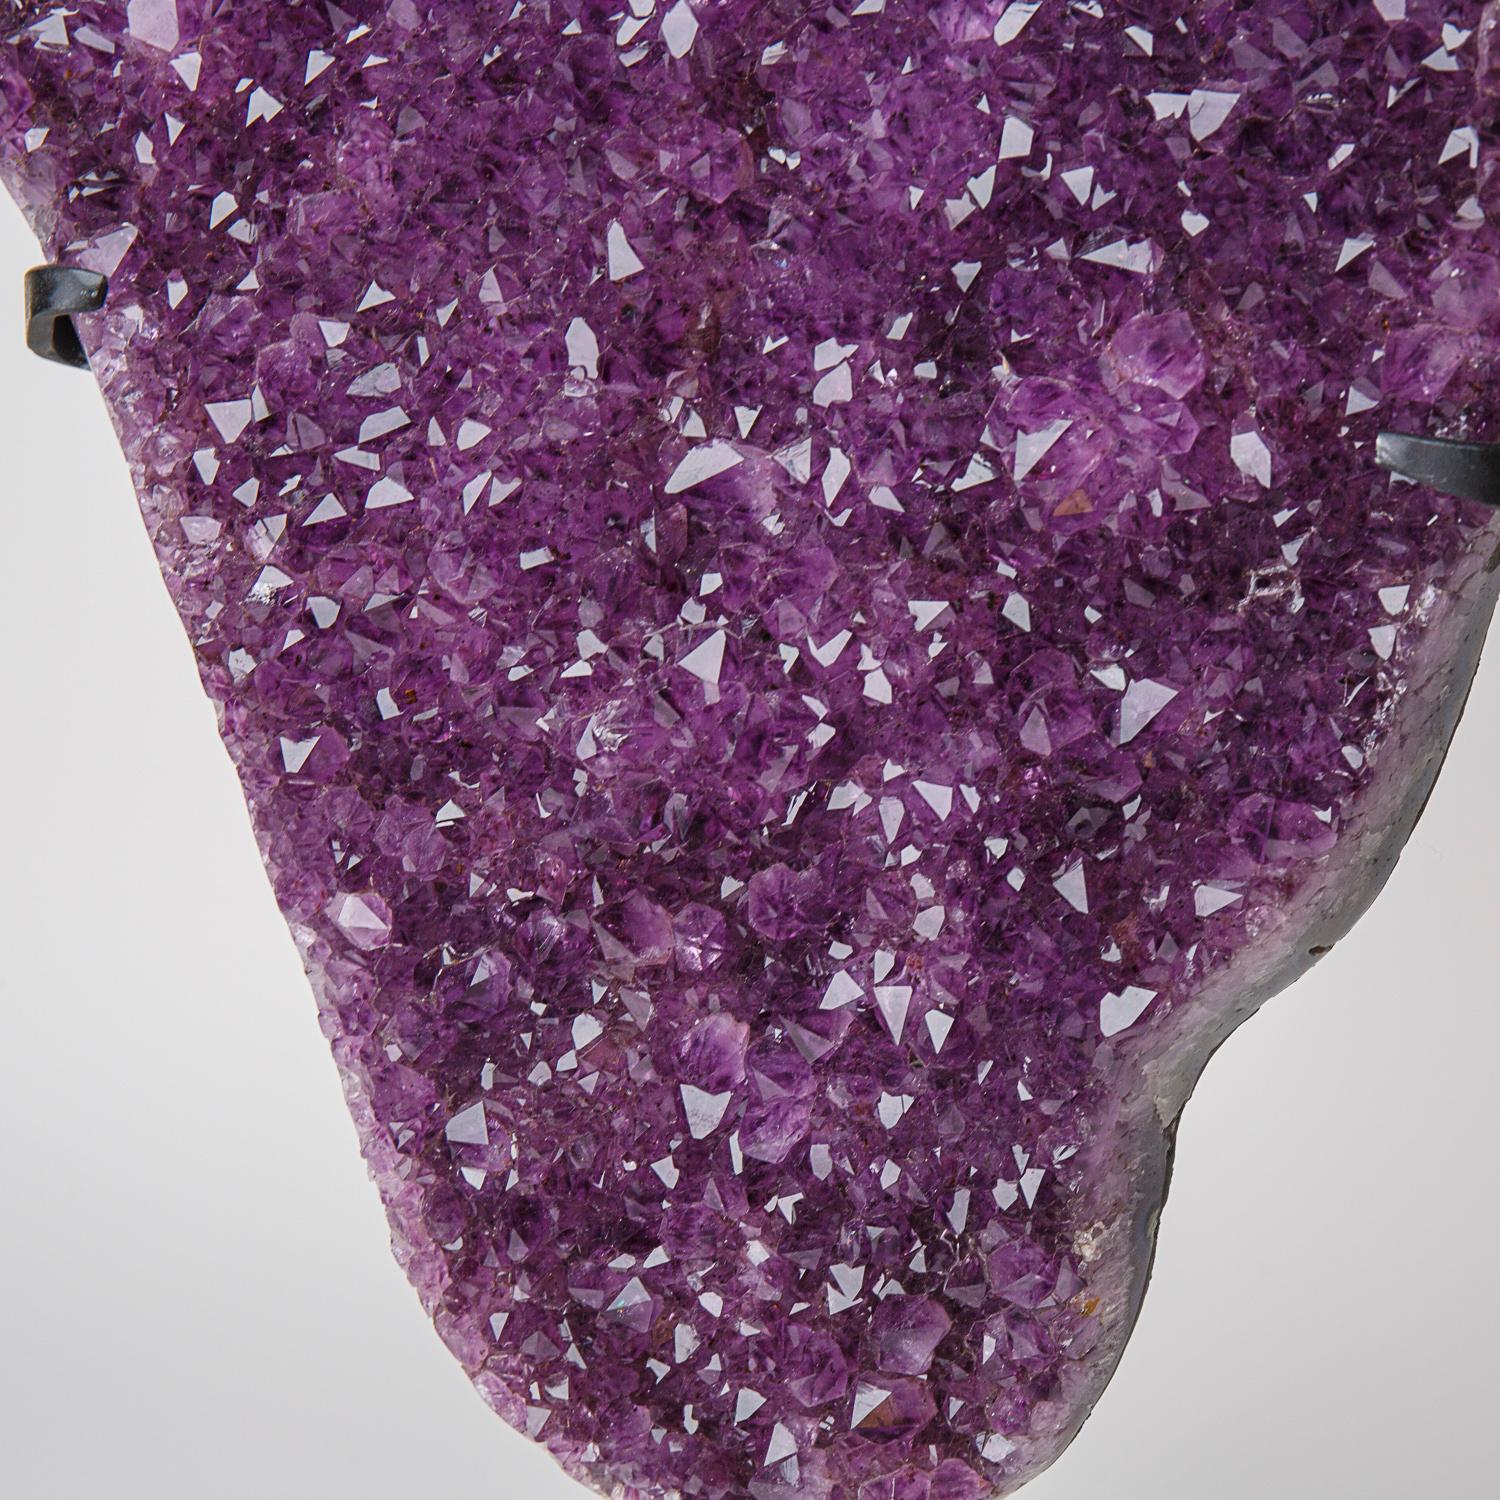 This museum quality Amethyst Quartz Cluster features naturally formed, lustrous and fully terminated crystals with highly reflective faces and a deep, transparent to translucent hues. This beautiful specimen comes with a metal stand and is perfect